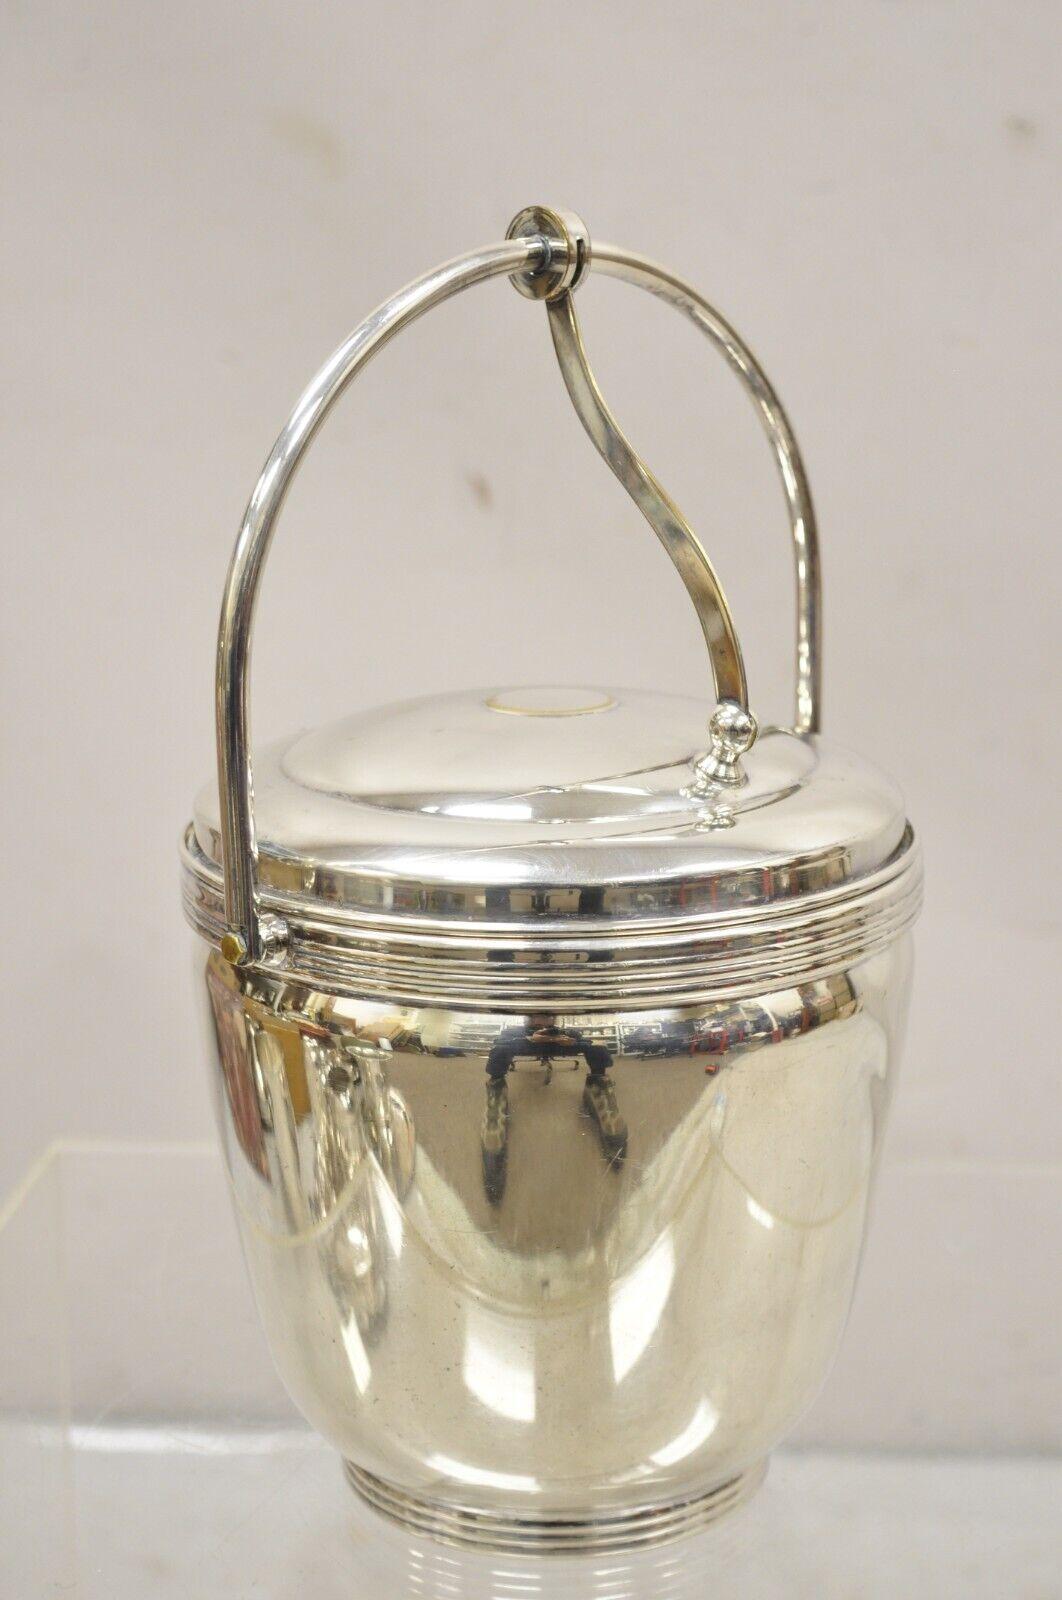 Vintage Sheffield Silver Co. Silver Plated Ice Bucket w/ Reticulated Hinge Lid and Ice Tongs. Circa Mid 20th Century.
Measurements:  13